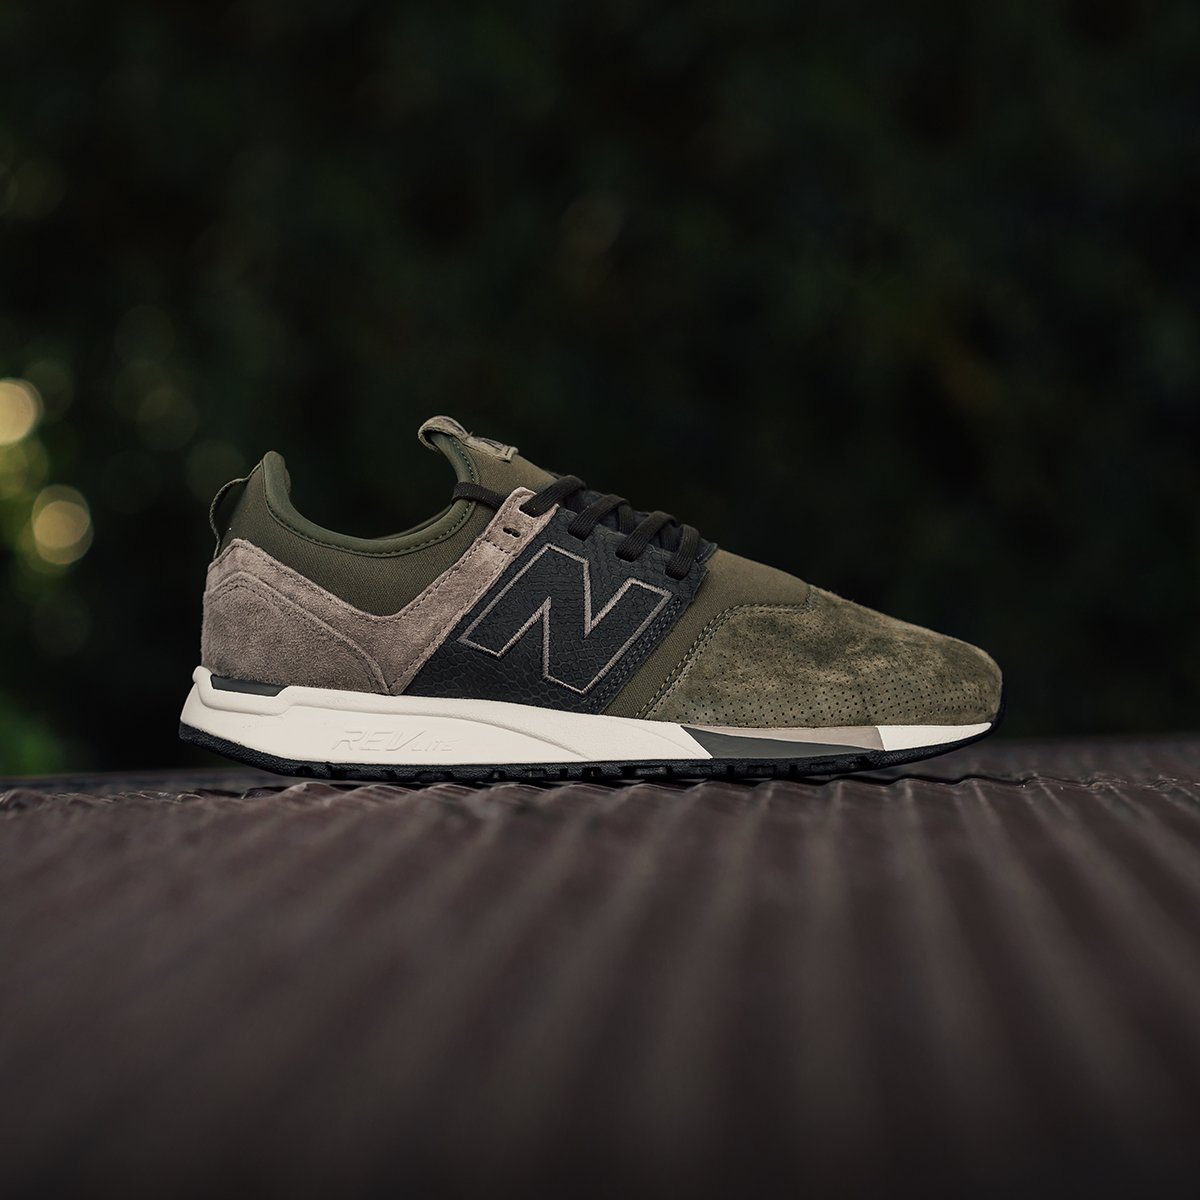 New Balance 247 Luxe “Reptile”